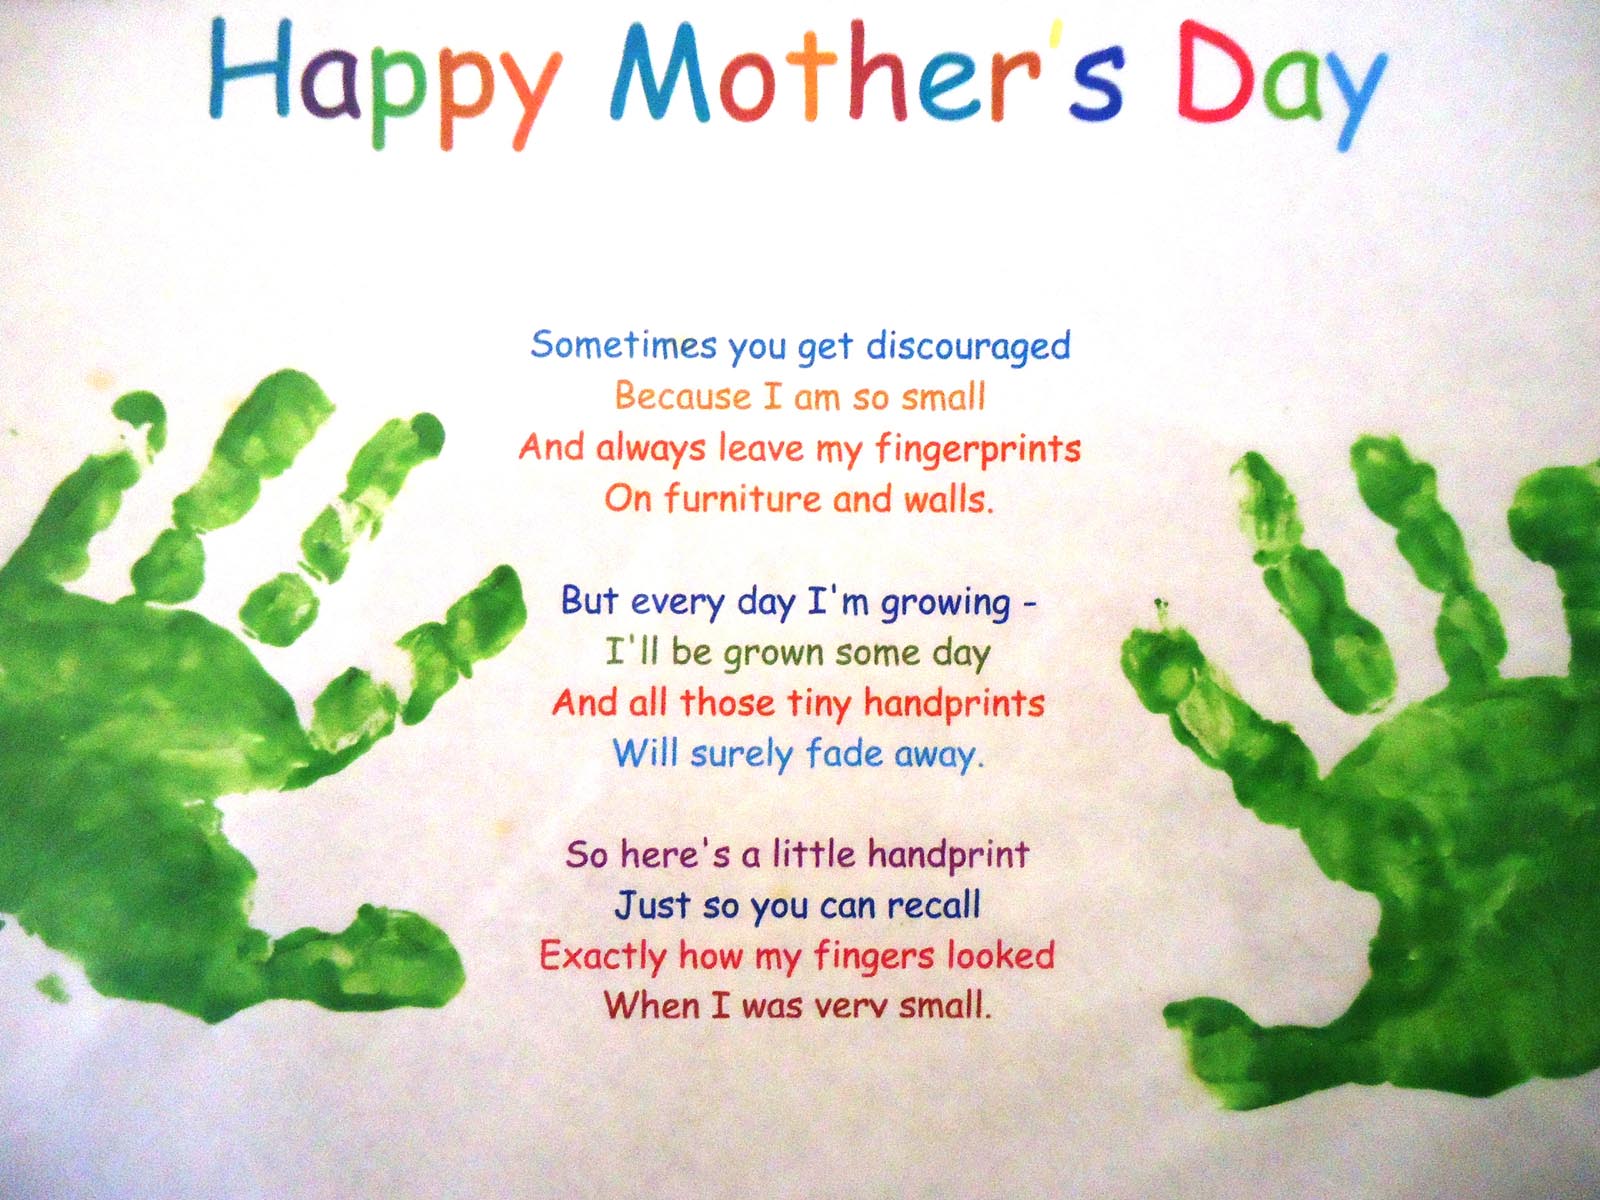 Happy Mothers Day Sister - Mothers Day Quotes Handprints - HD Wallpaper 